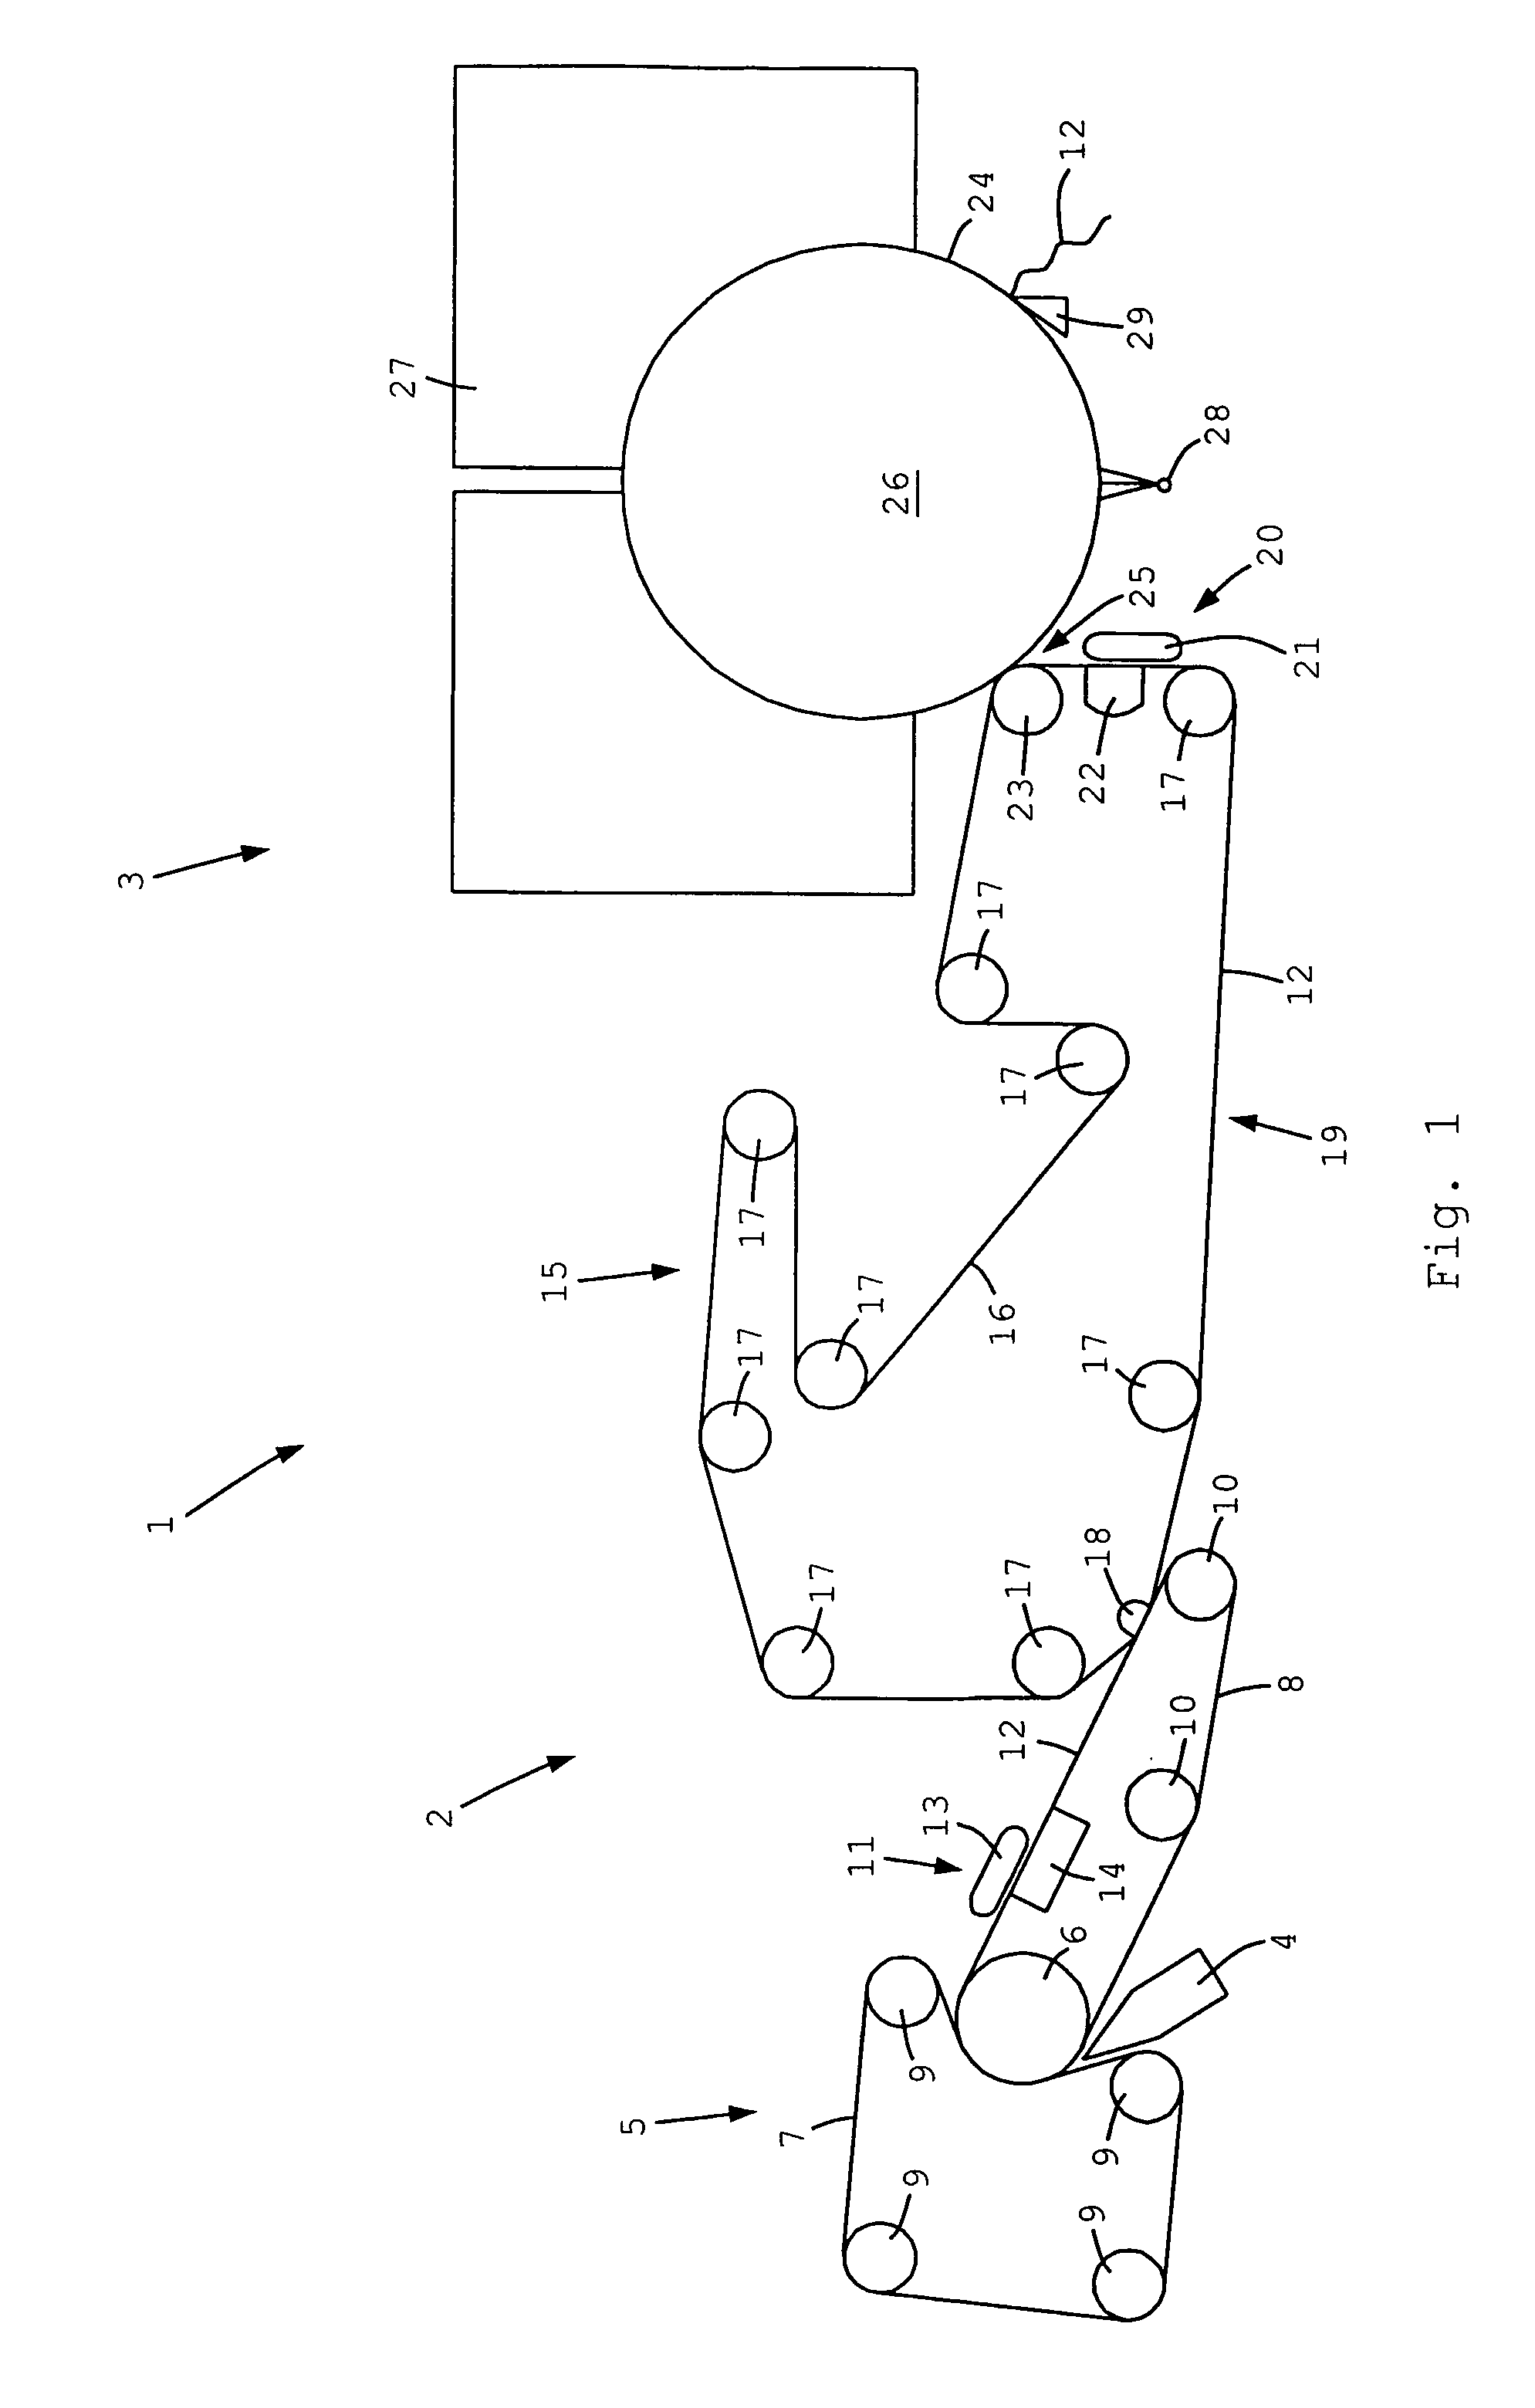 Paper machine and method for manufacturing paper